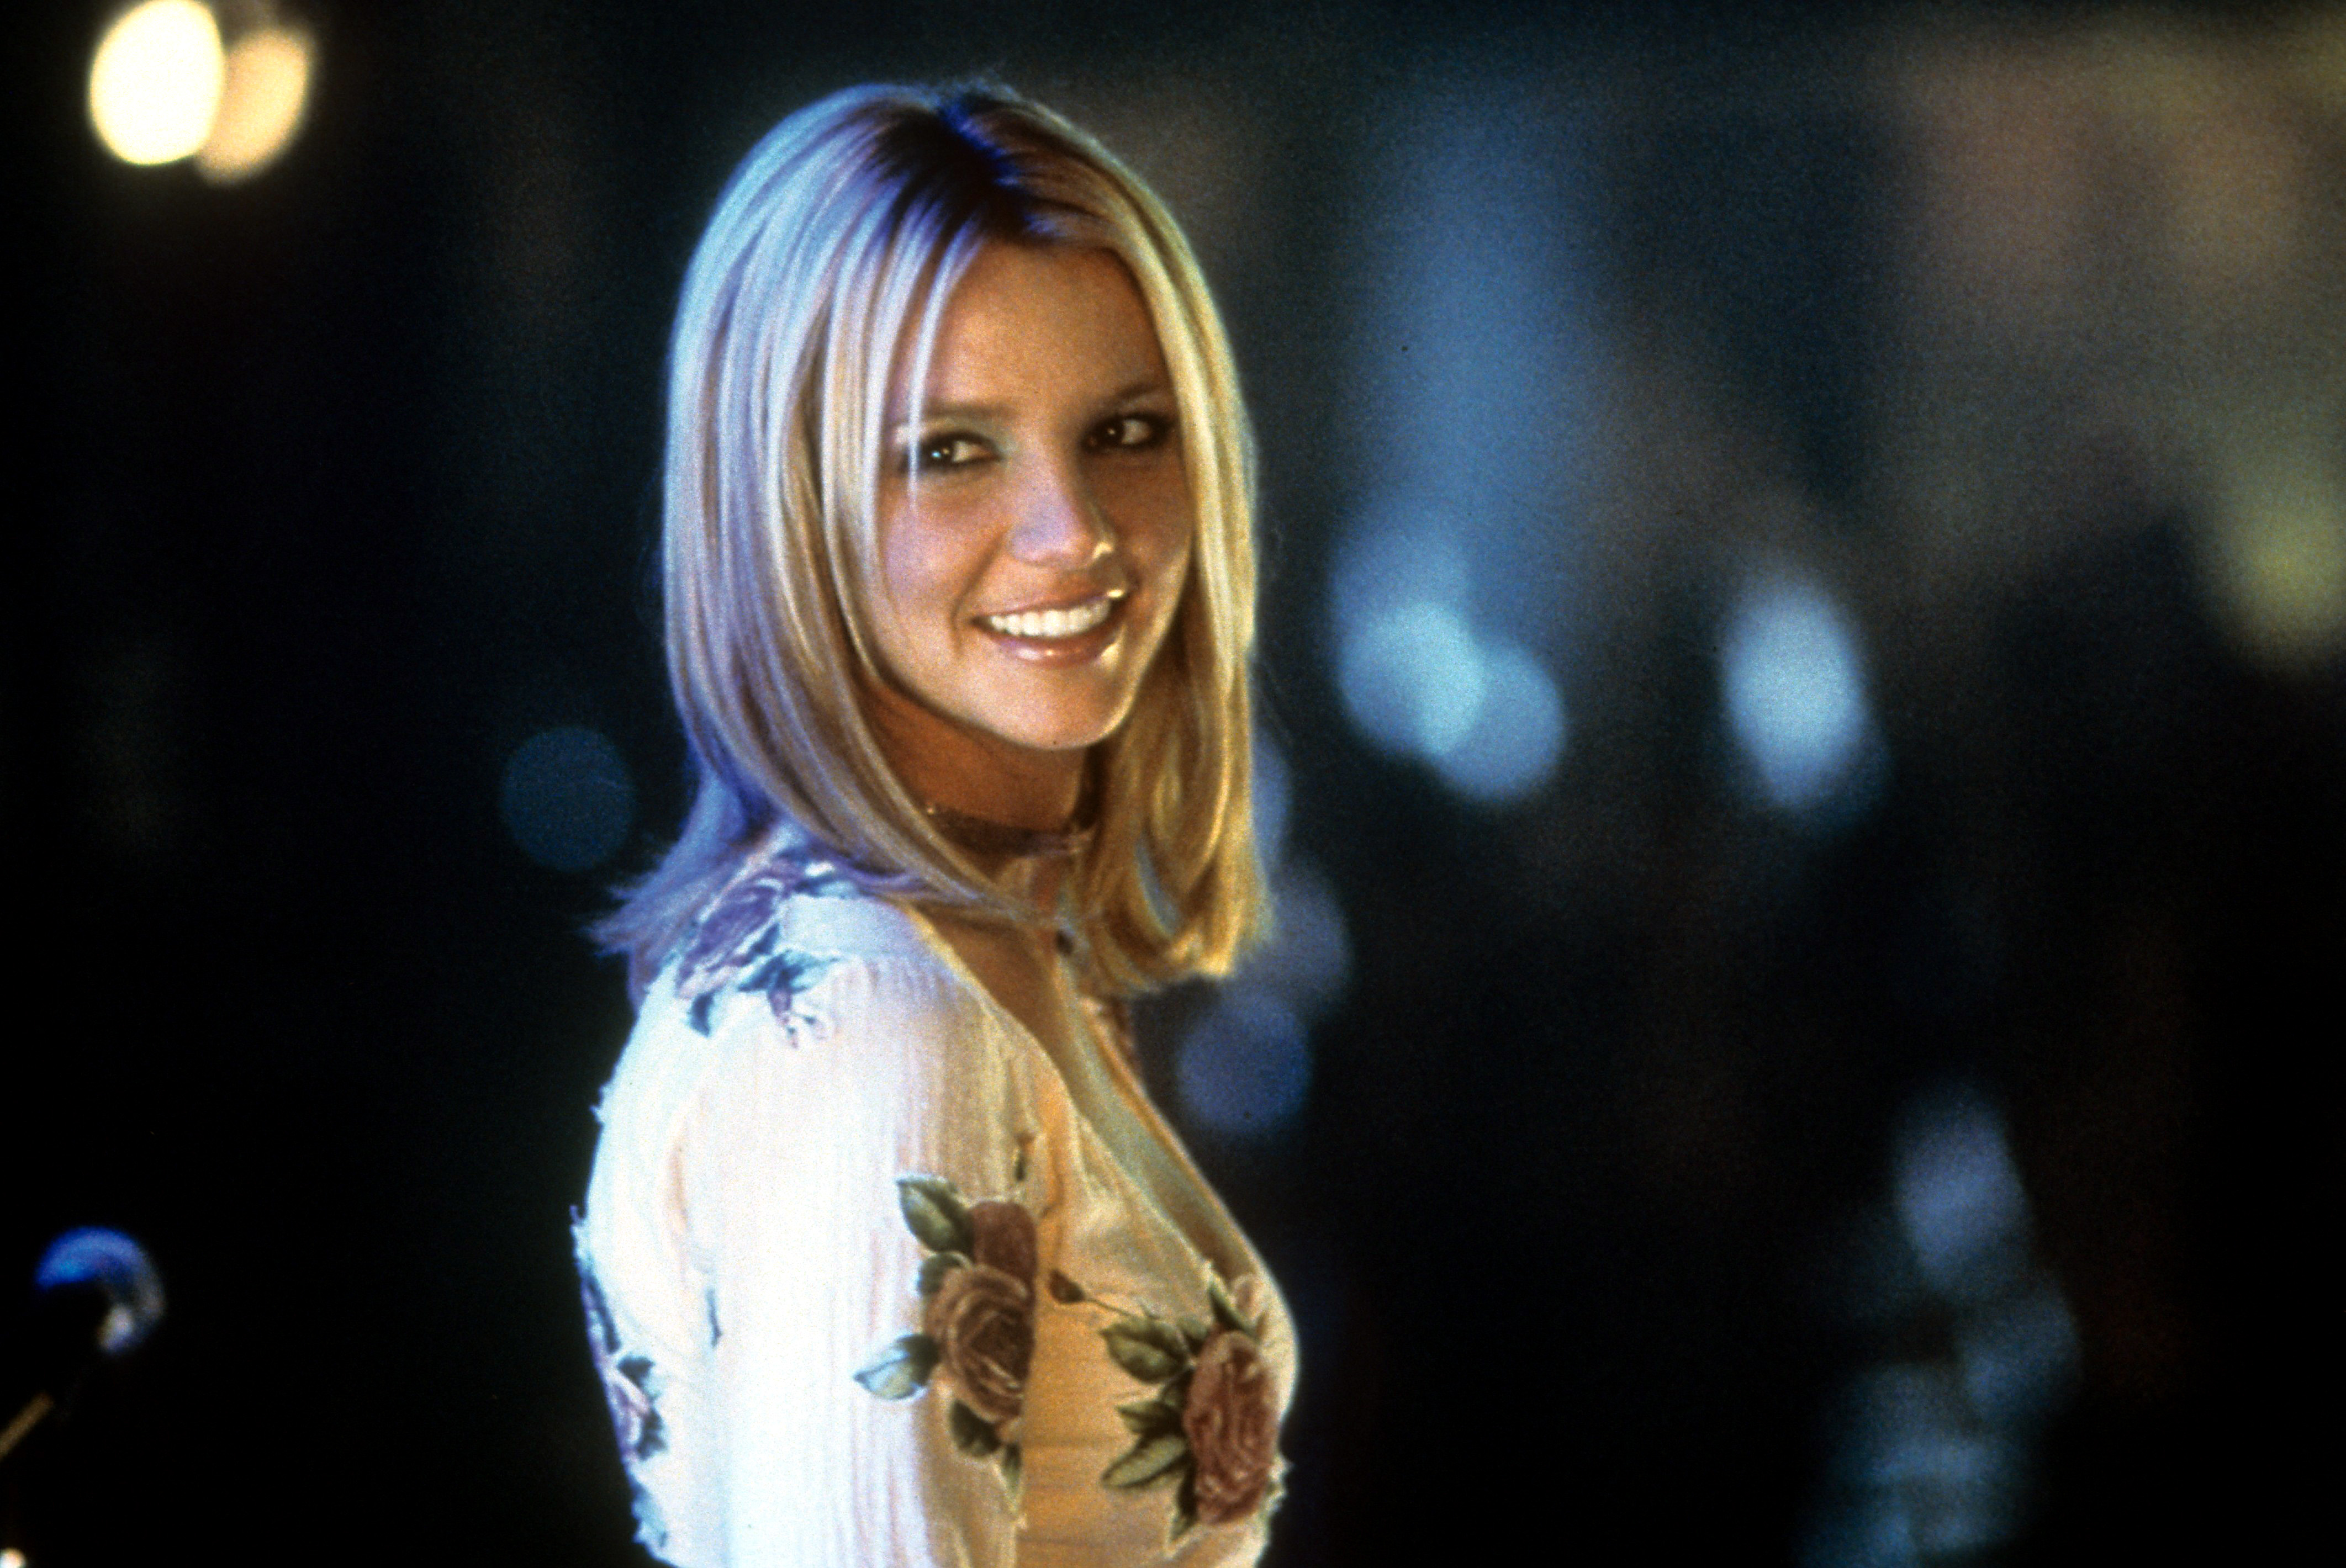 Britney Spears in a scene from the film "Crossroads," circa 2002. | Source: Getty Images